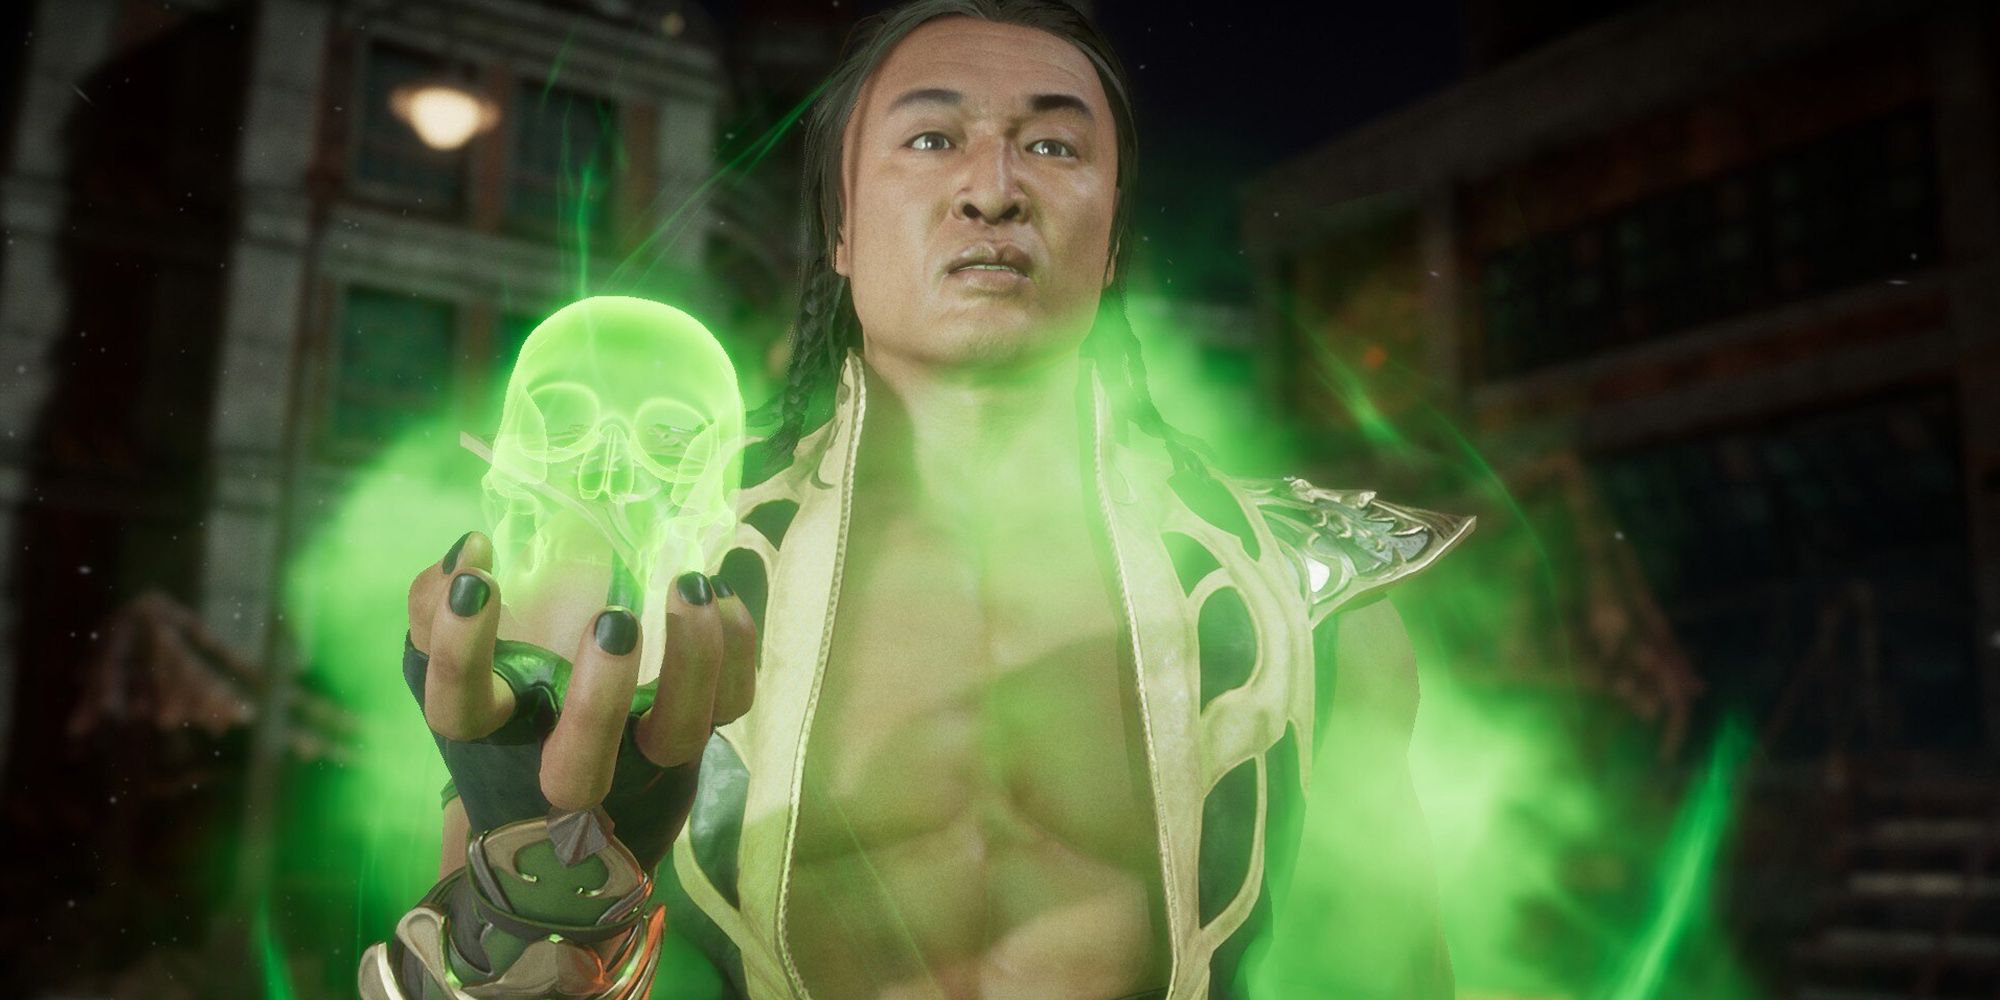 Mortal Kombat - Shang Tsung In His Younger Form Using His Powers